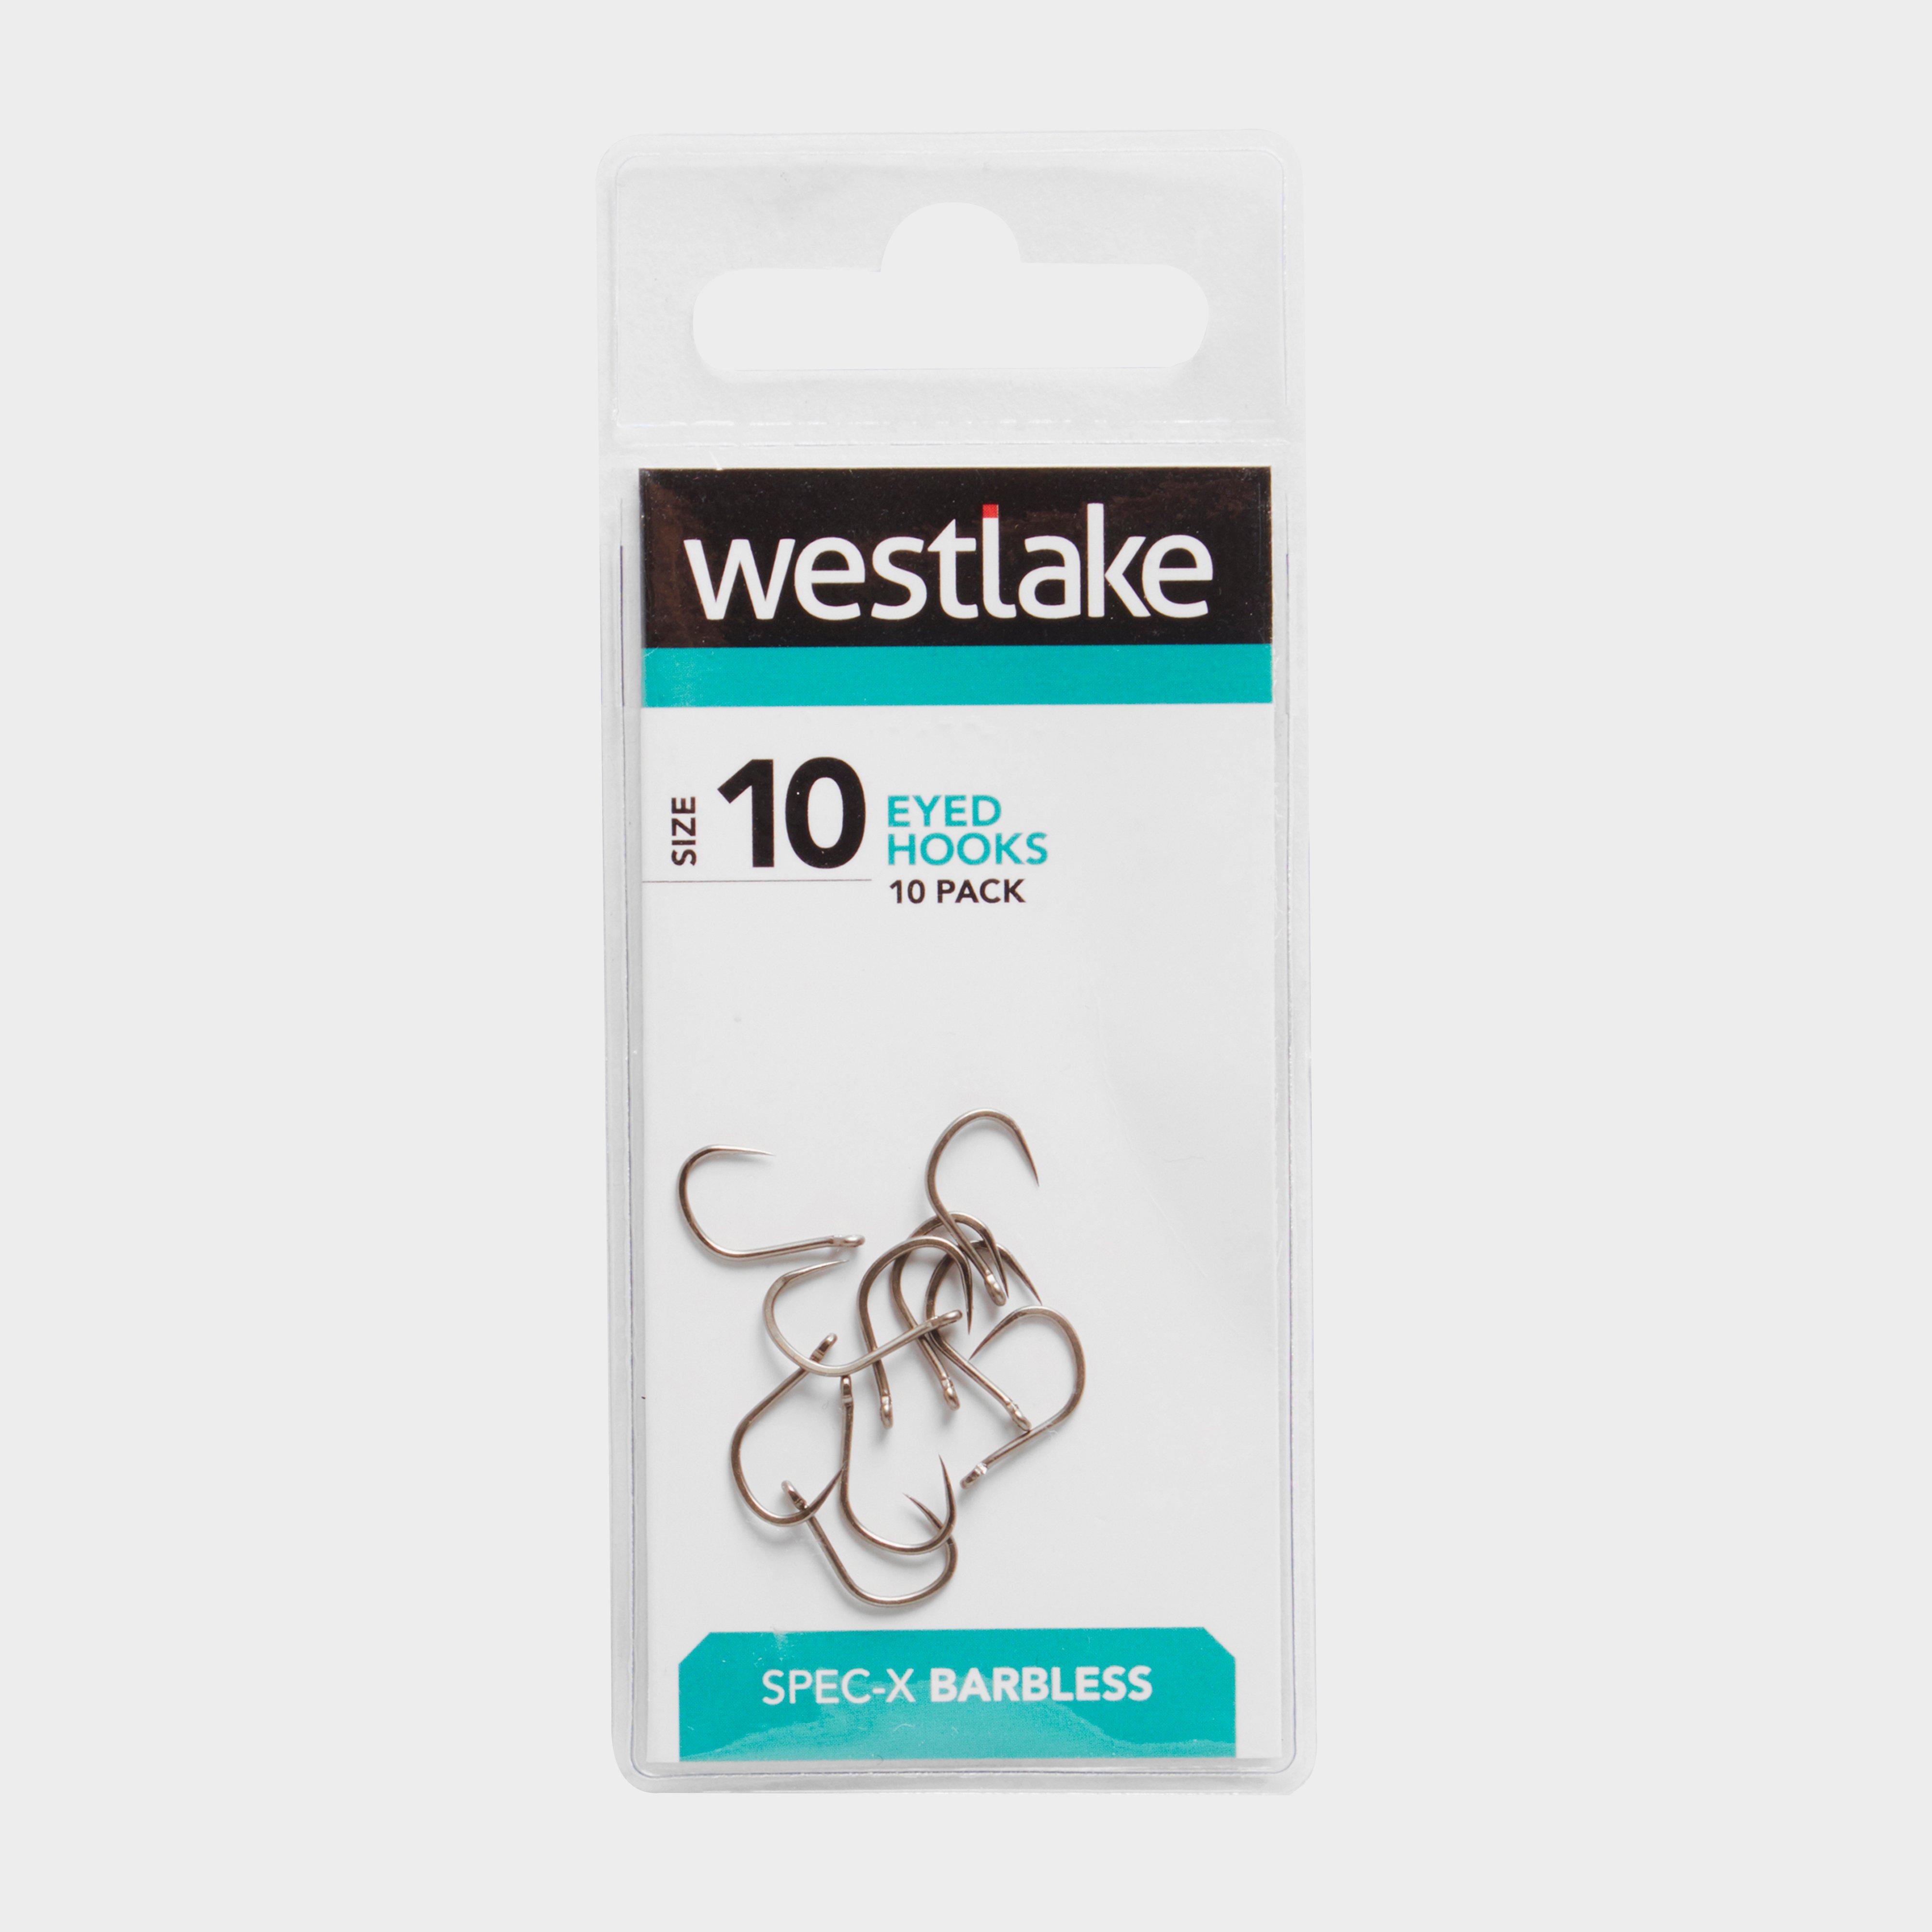 Photos - Fishing Hook / Jig Head West Lake Eyed Barbless 10, Silver 